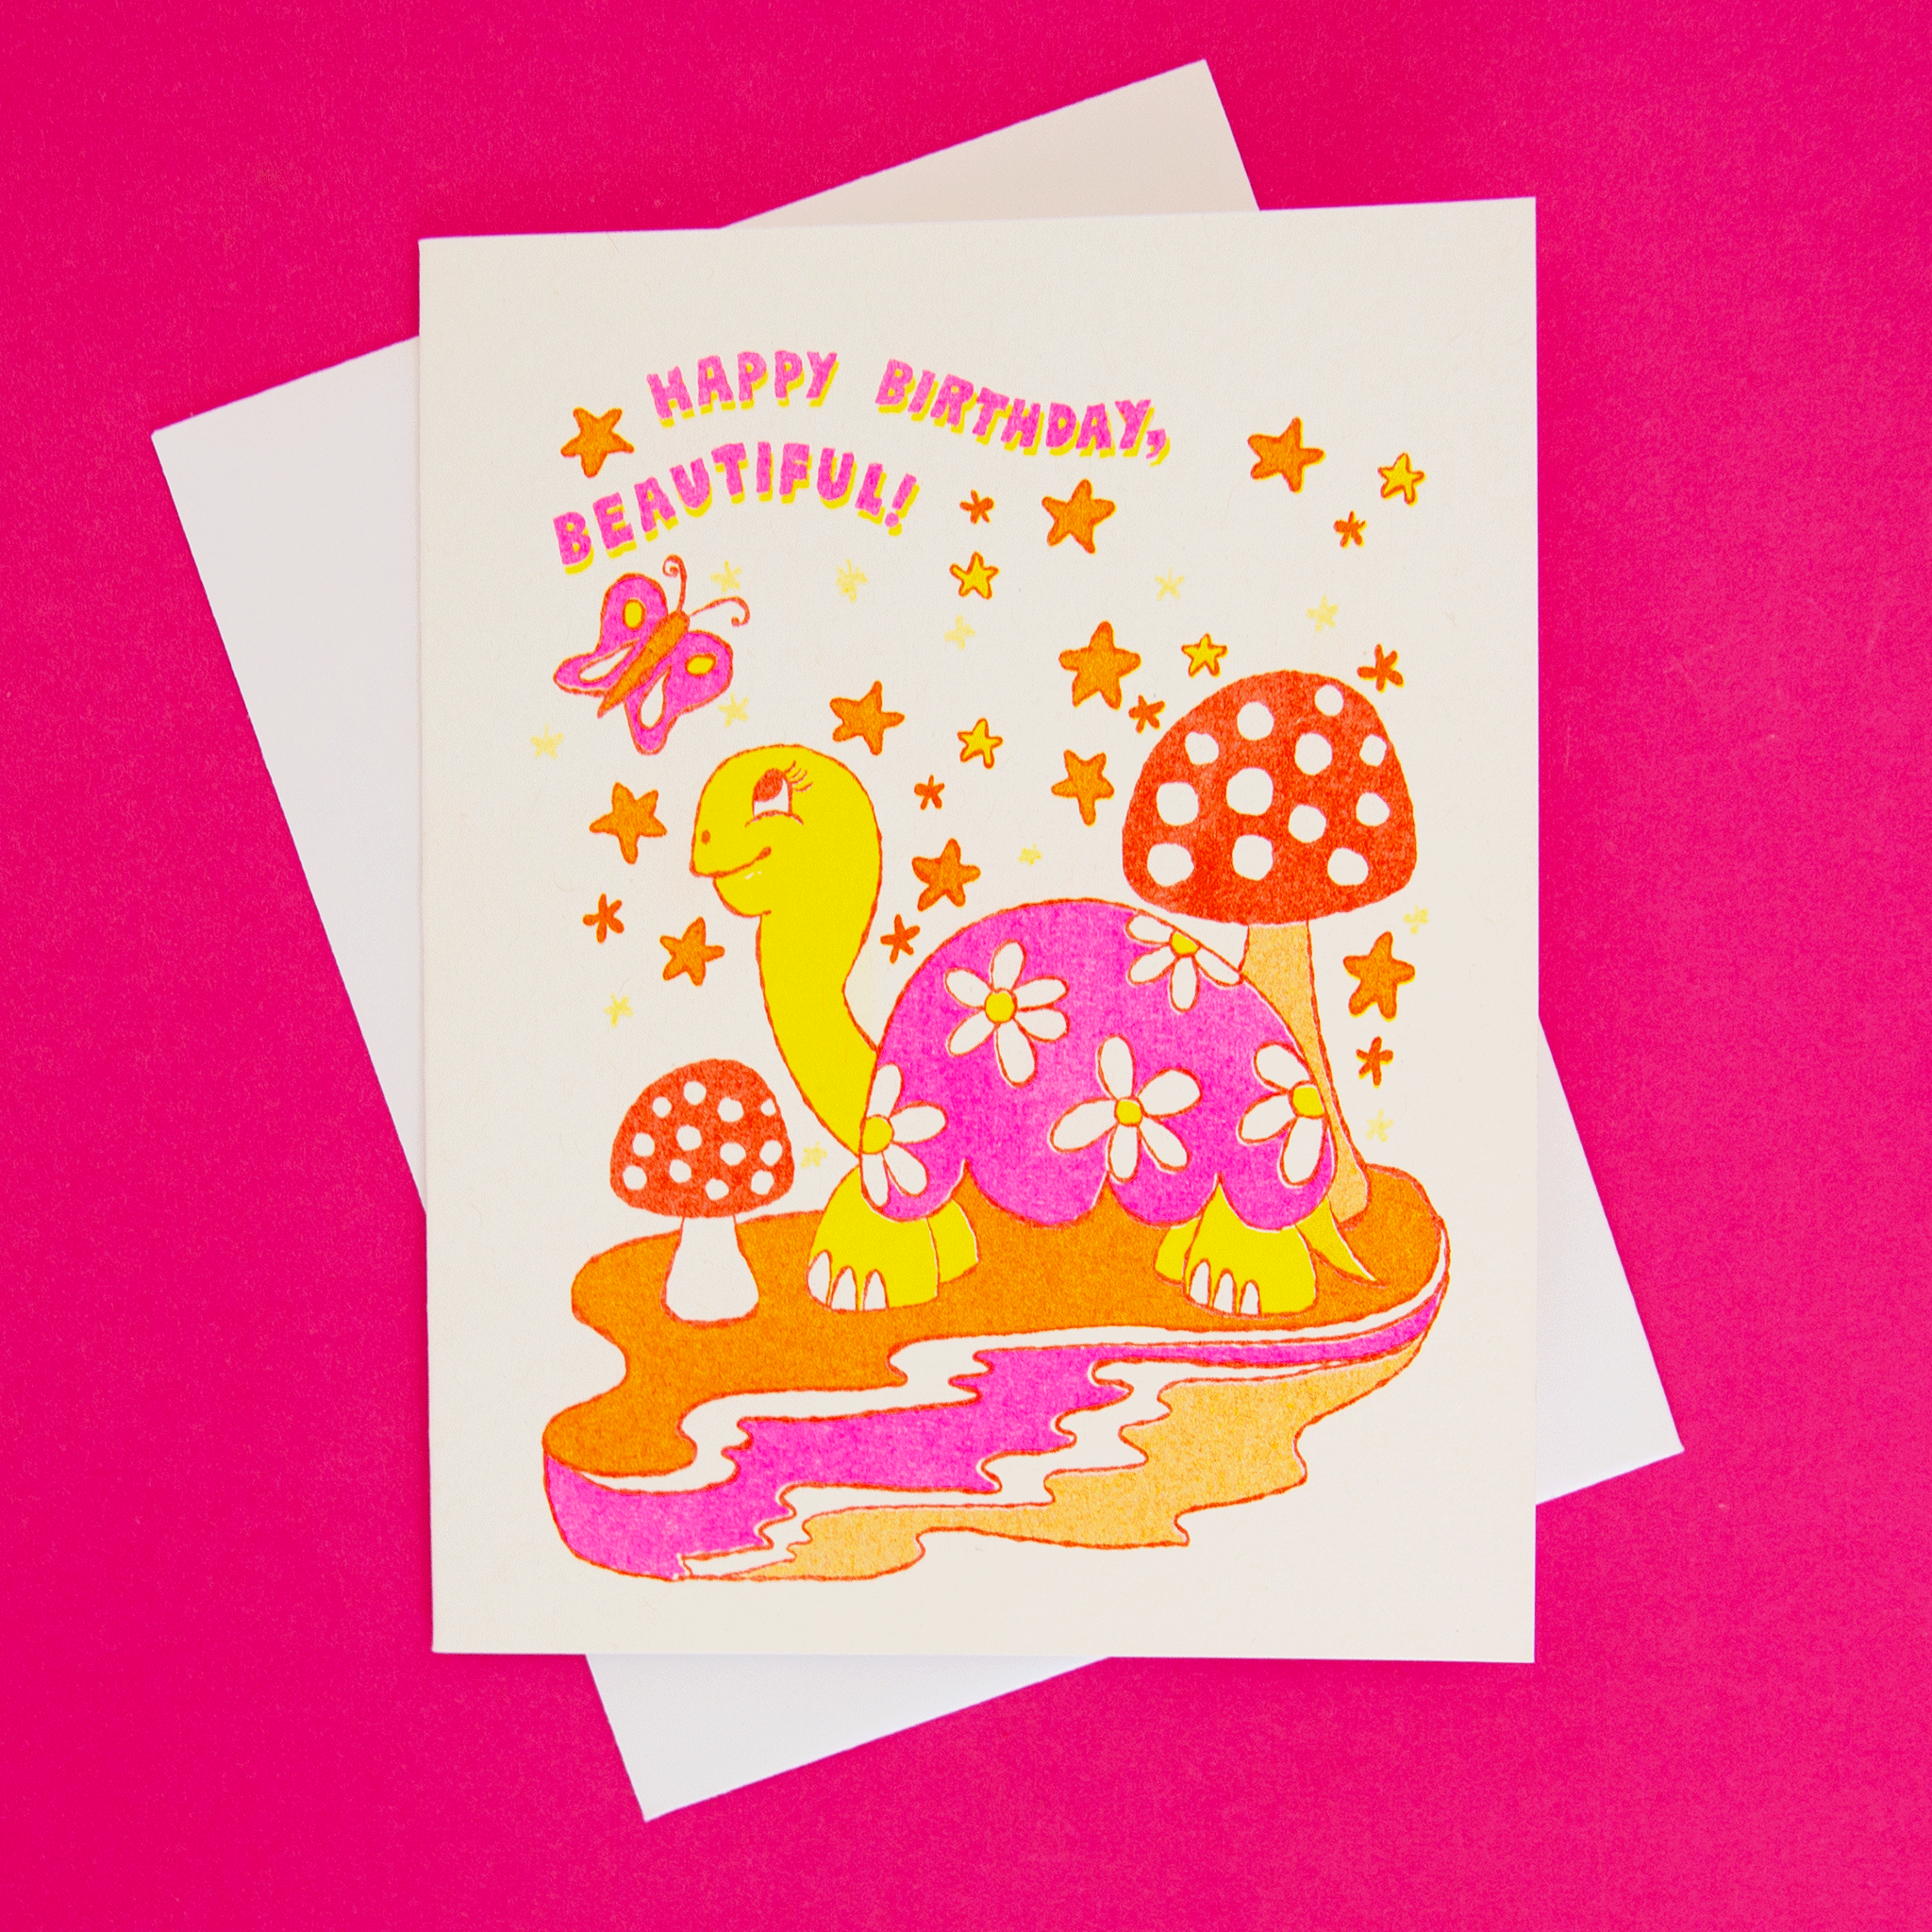  On a coral background is a white card with a colorful, red, pink and orange turtle illustration surrounded by mushroom, stars and a butterfly along with text that reads, "Happy Birthday Beautiful!".